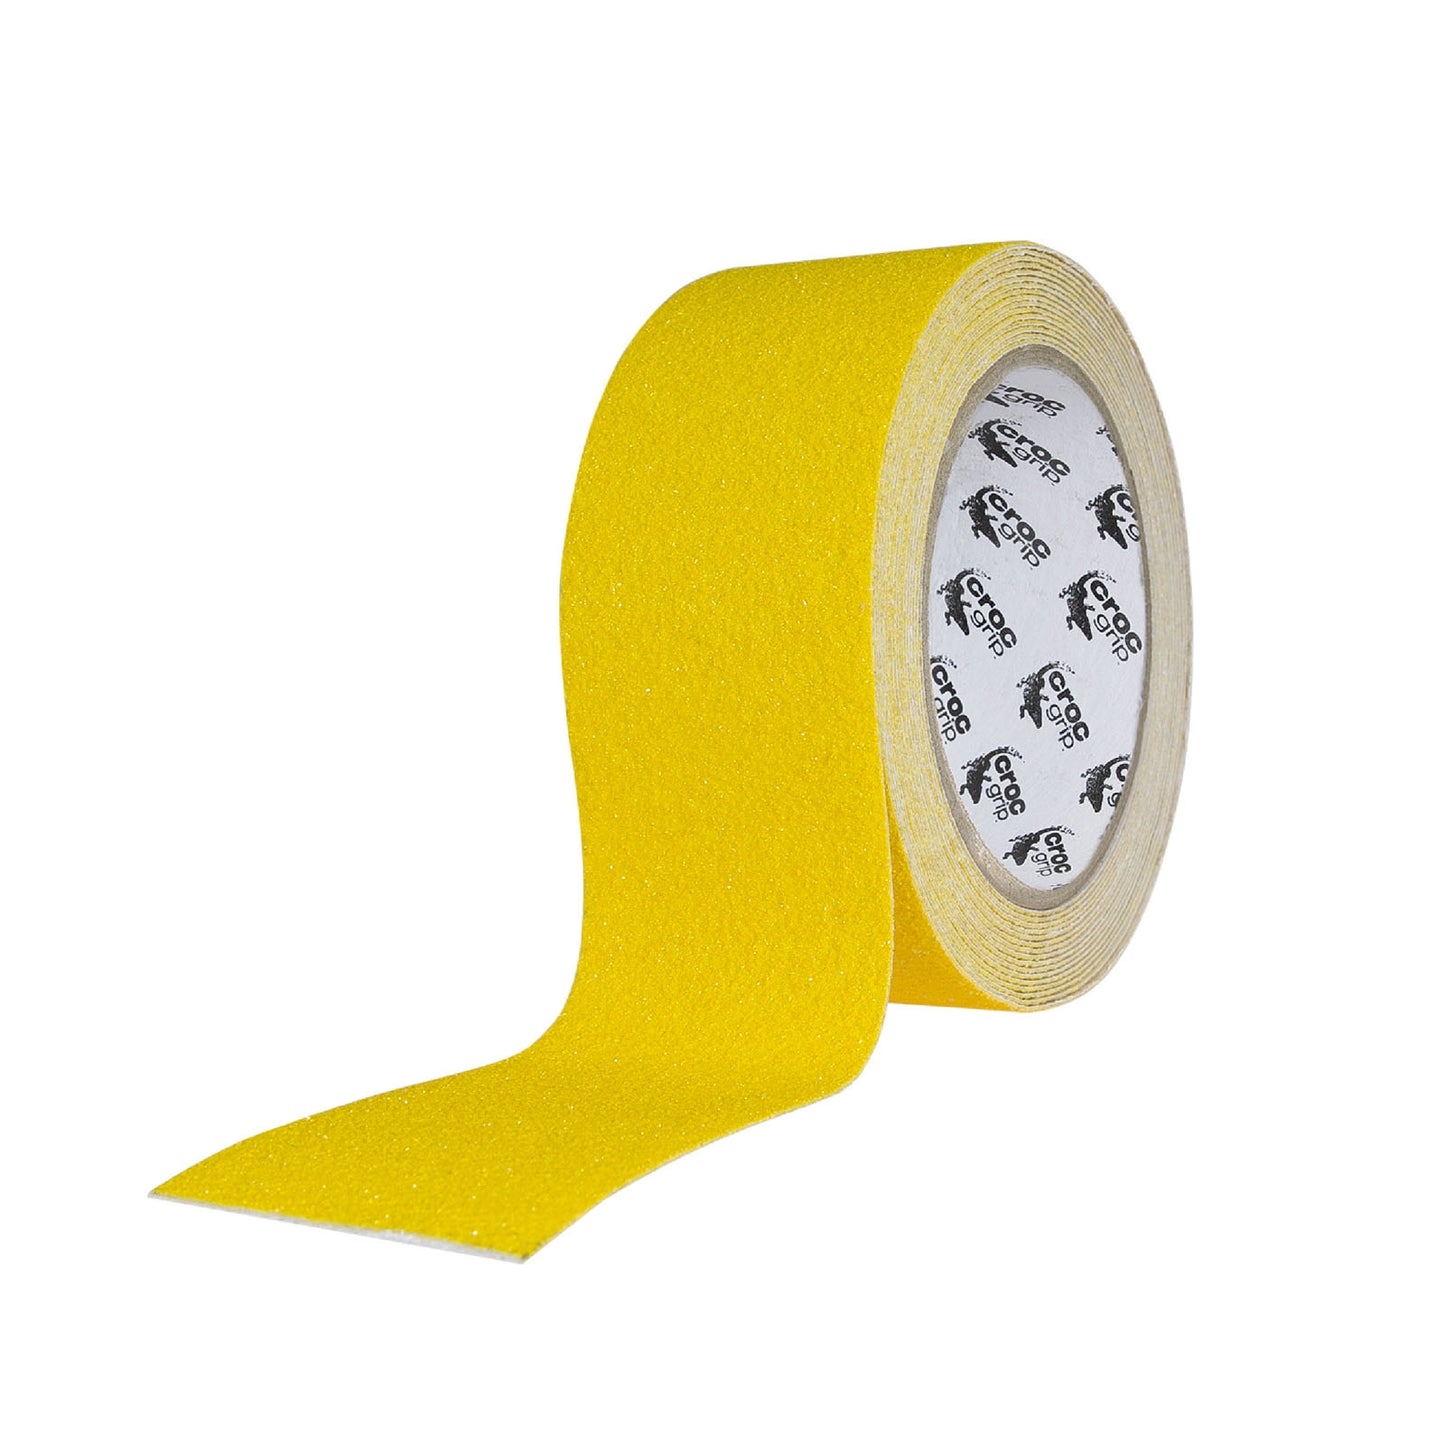 5M x 48MM Yellow Commercial High Grit Heavy Duty Anti-Slip Tape